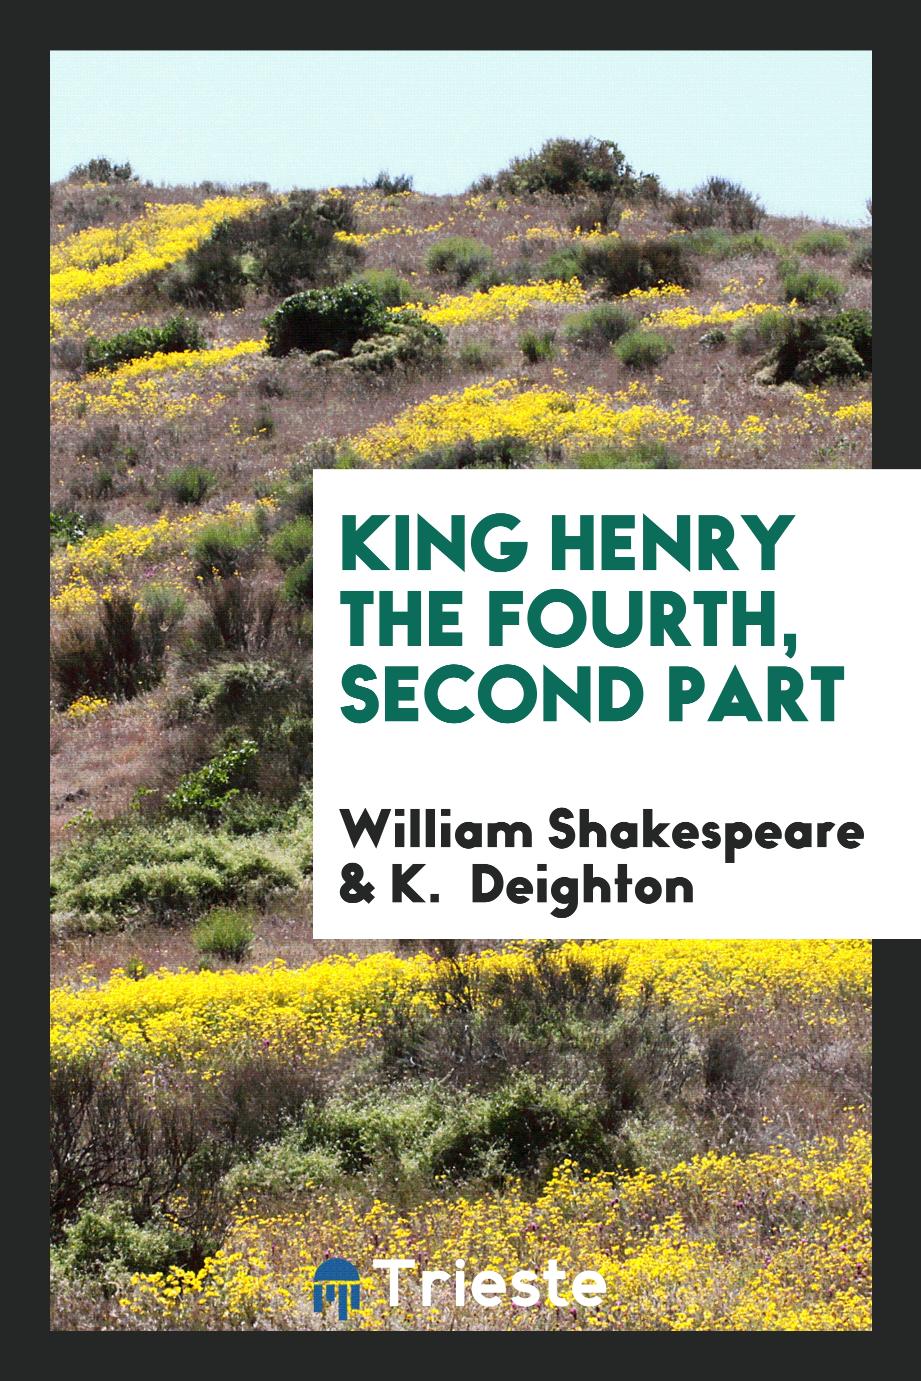 King Henry the Fourth, Second Part